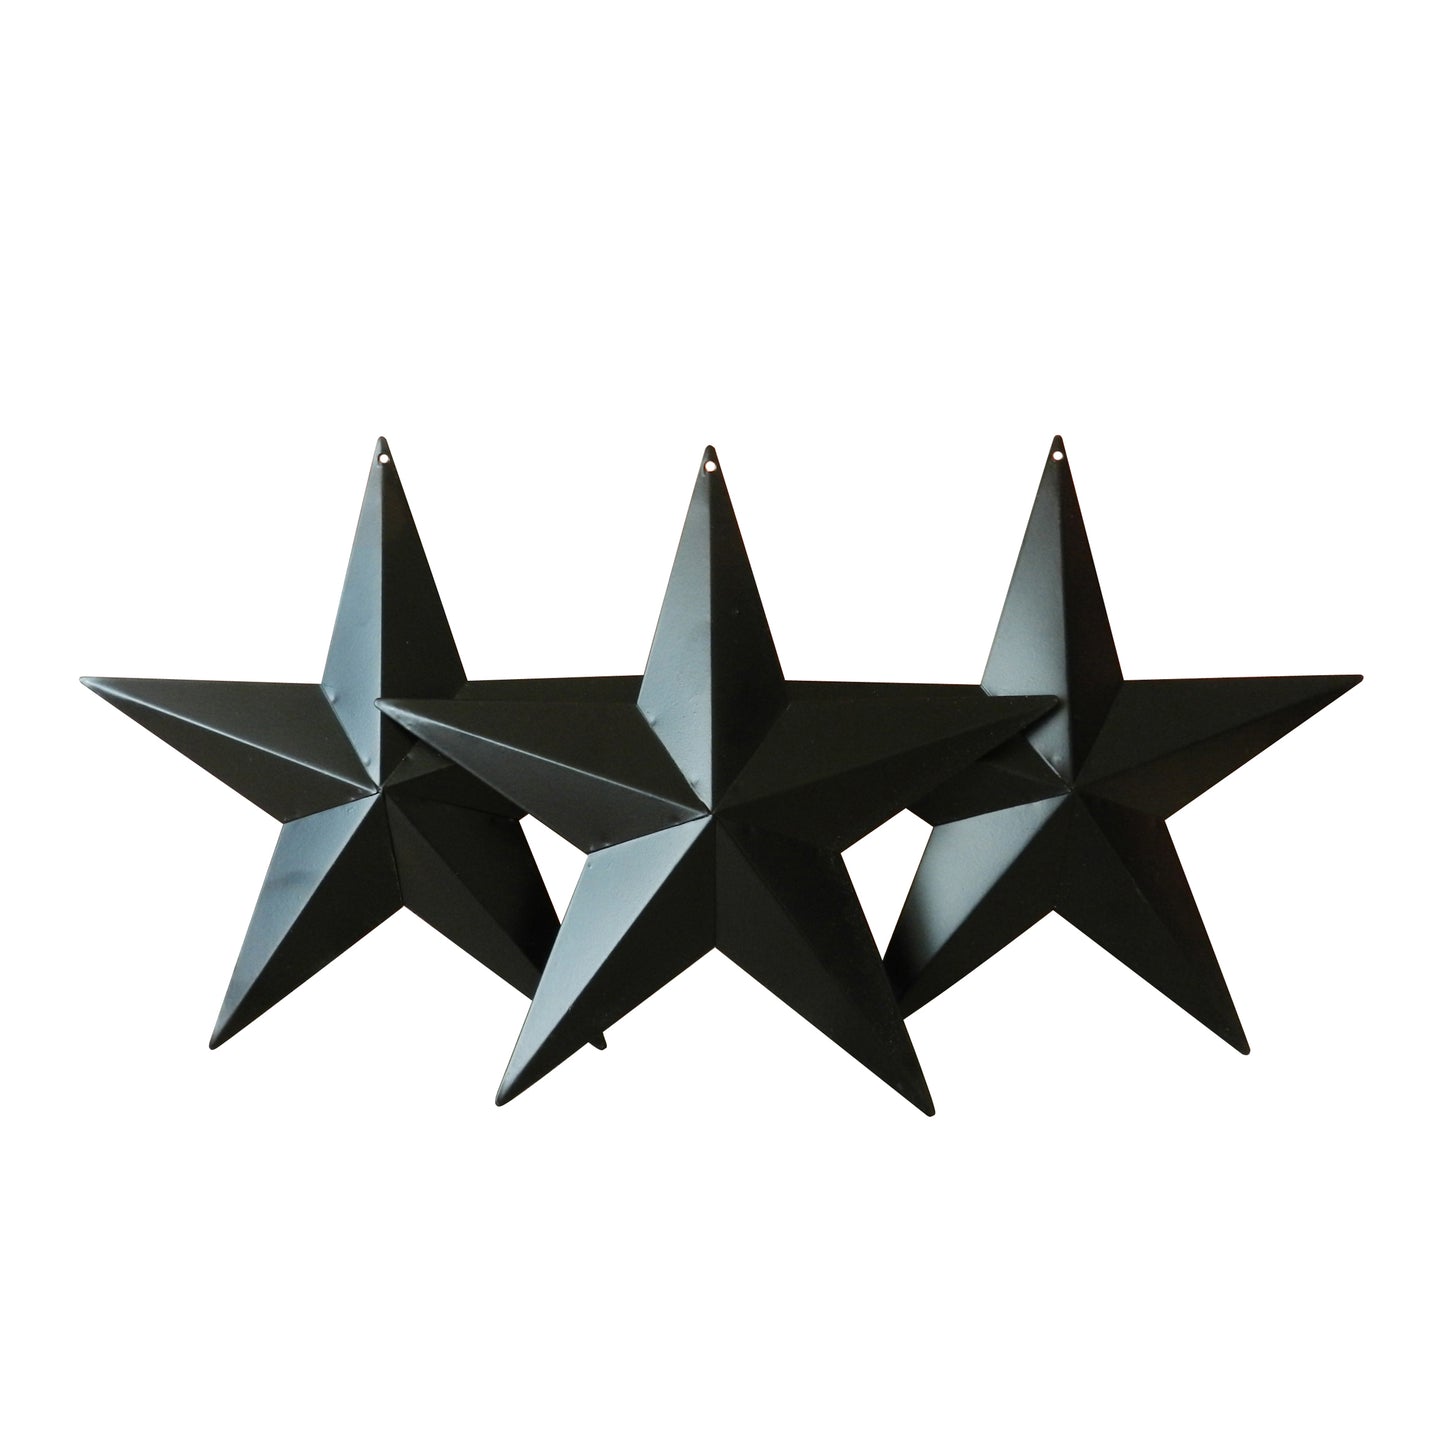 CVHOMEDECO. Country Rustic Antique Vintage Gifts Black Metal Barn Star Wall/Door Decor, 8 Inch, Set of 3.